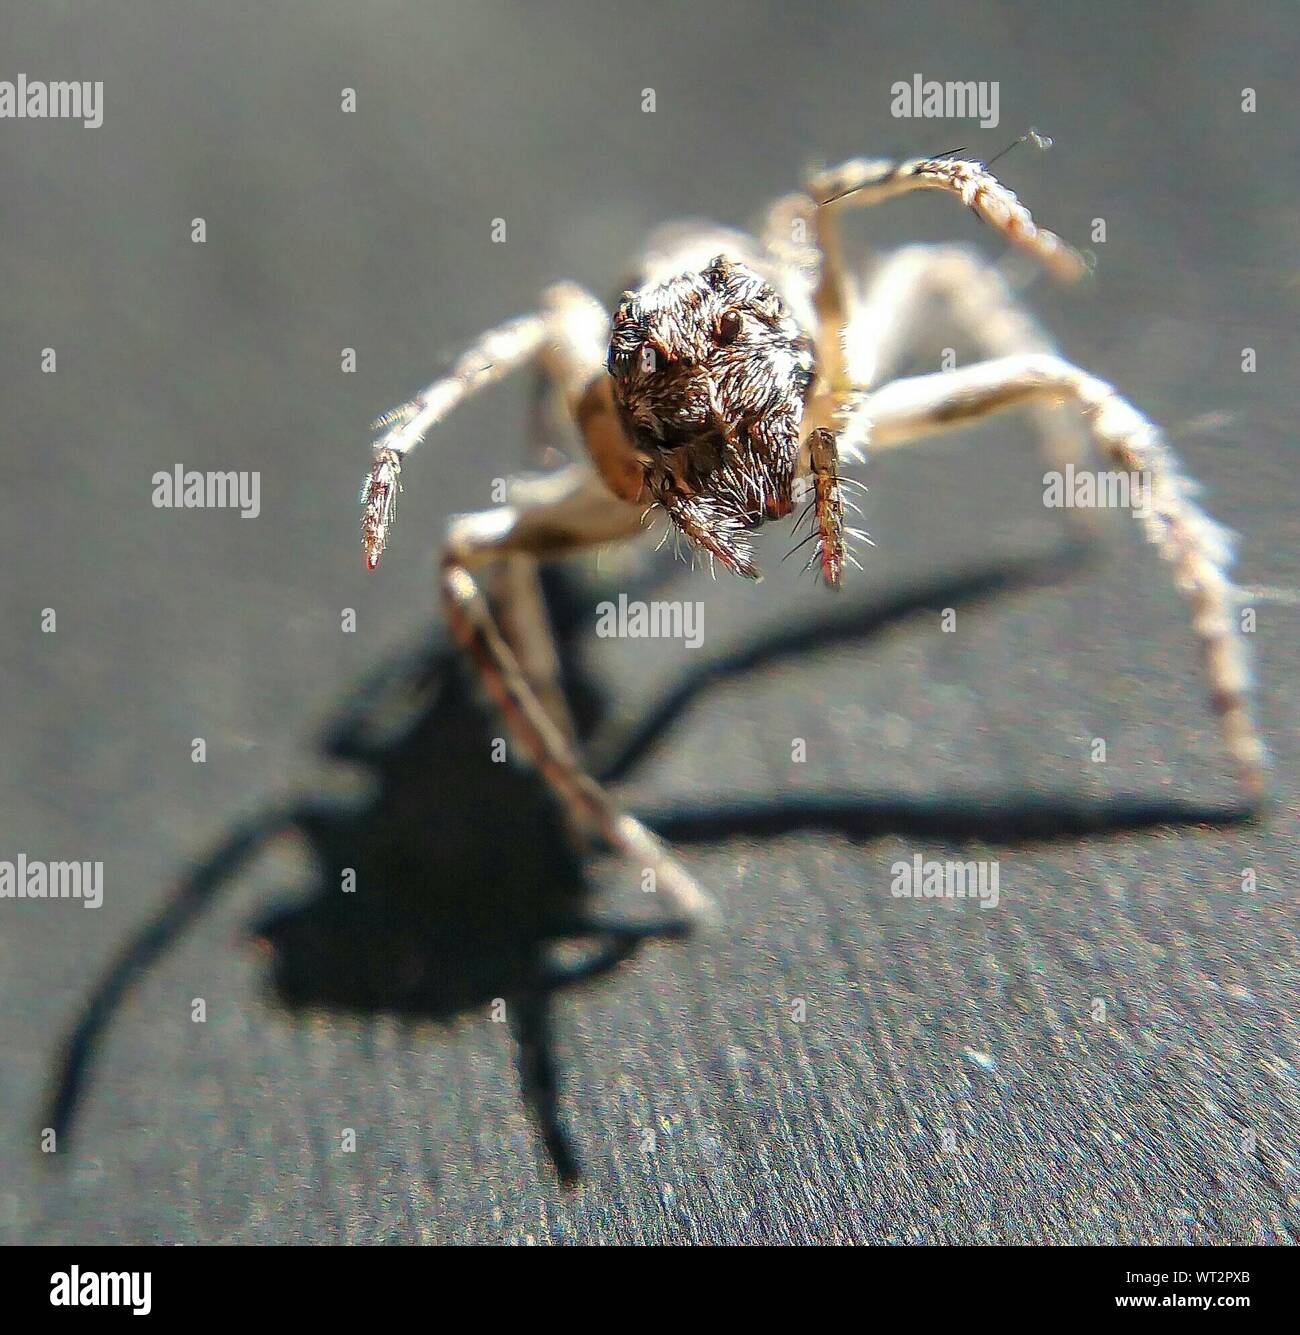 Close-up Surface Level Of A Spider Stock Photo